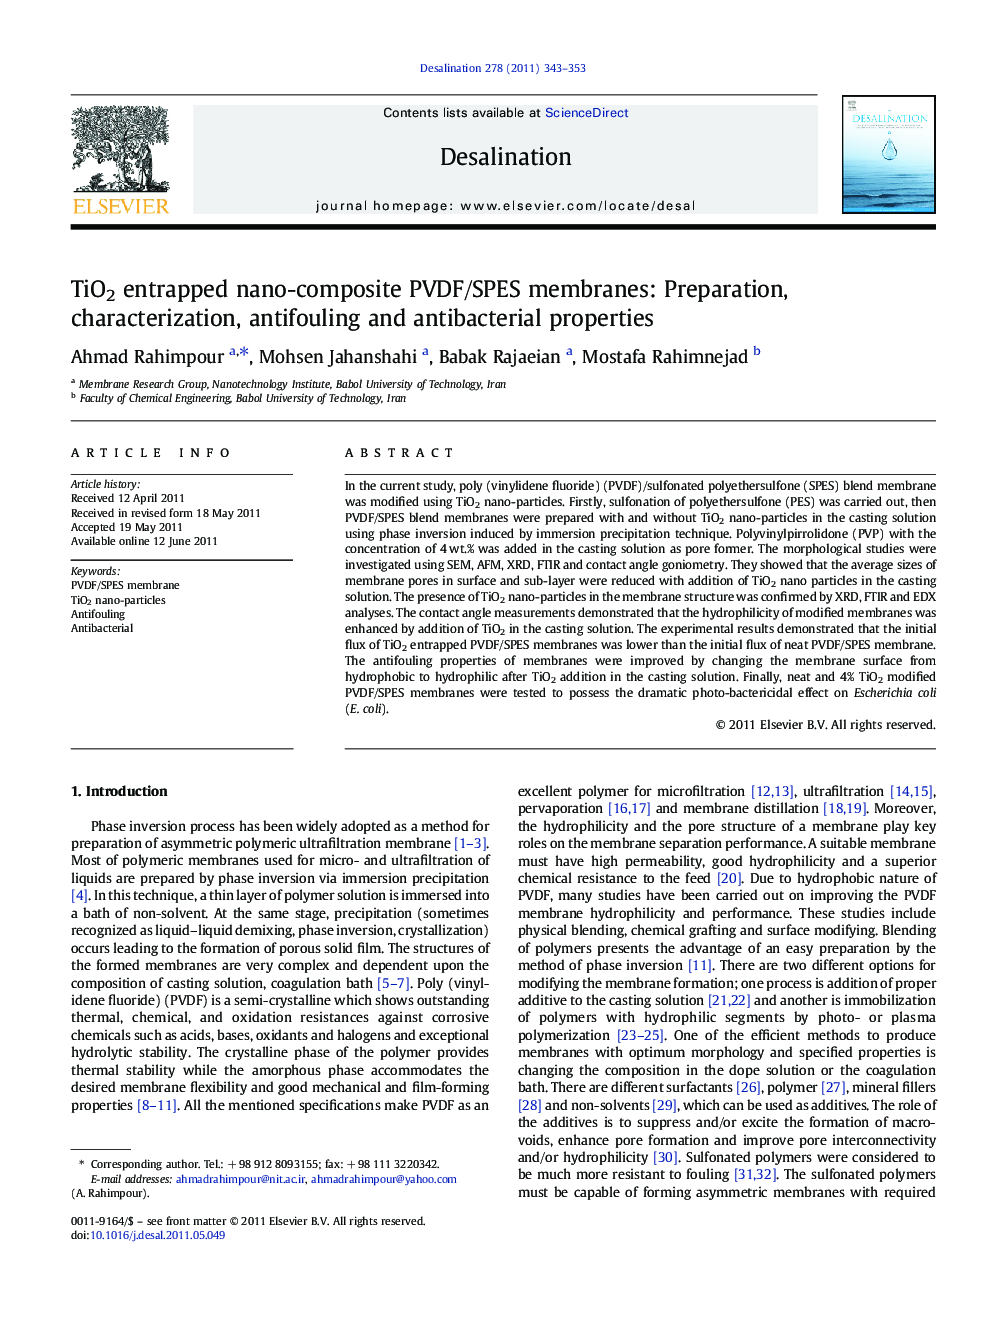 TiO2 entrapped nano-composite PVDF/SPES membranes: Preparation, characterization, antifouling and antibacterial properties